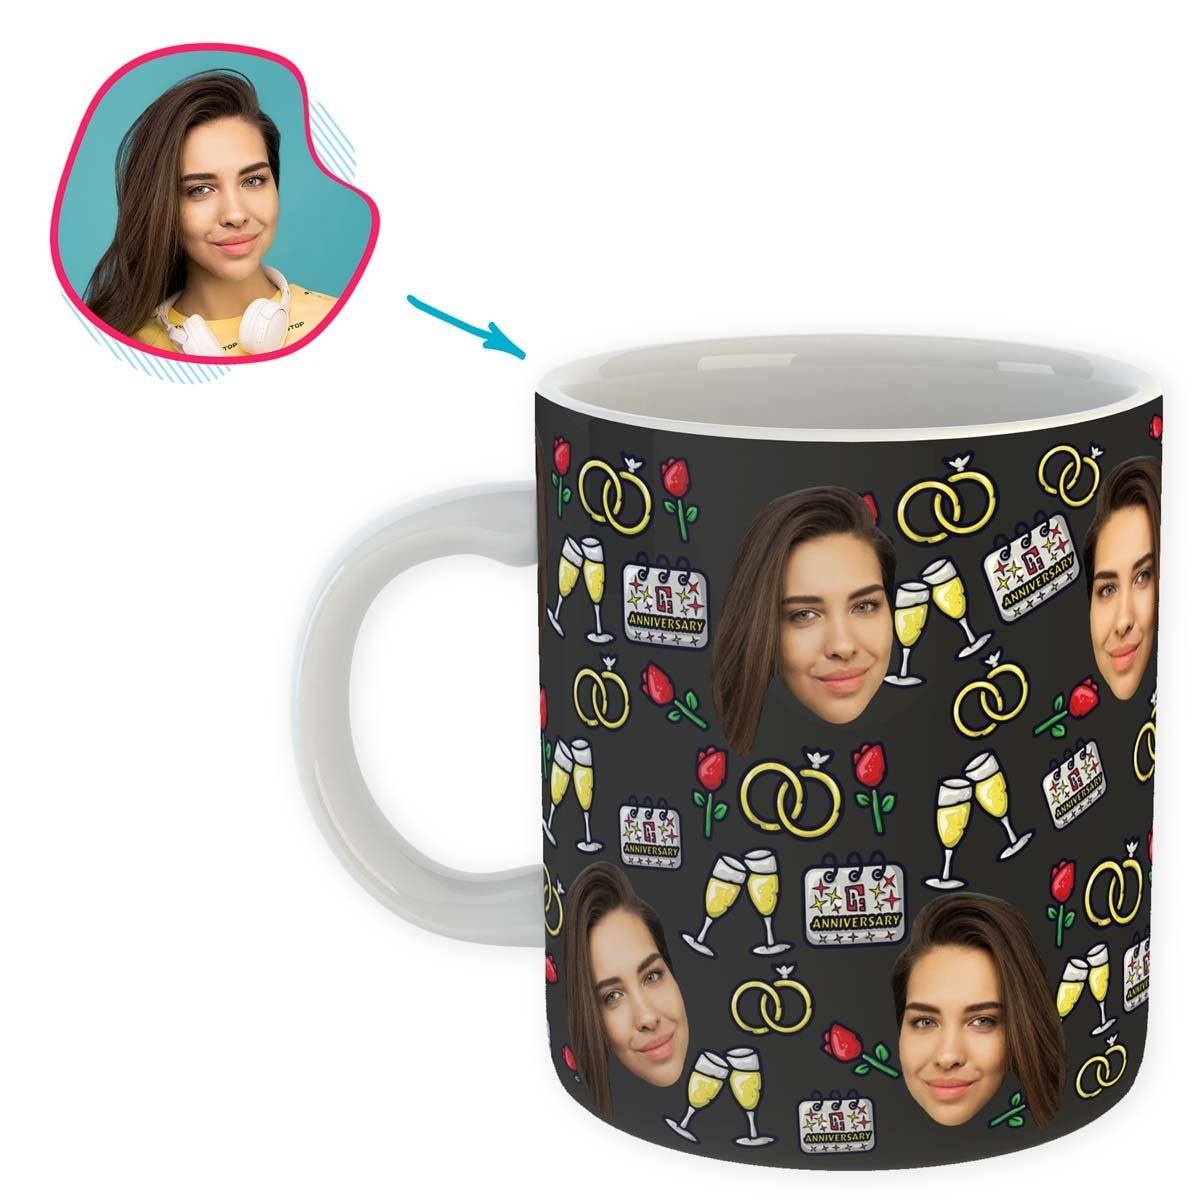 Dark Anniversary personalized mug with photo of face printed on it